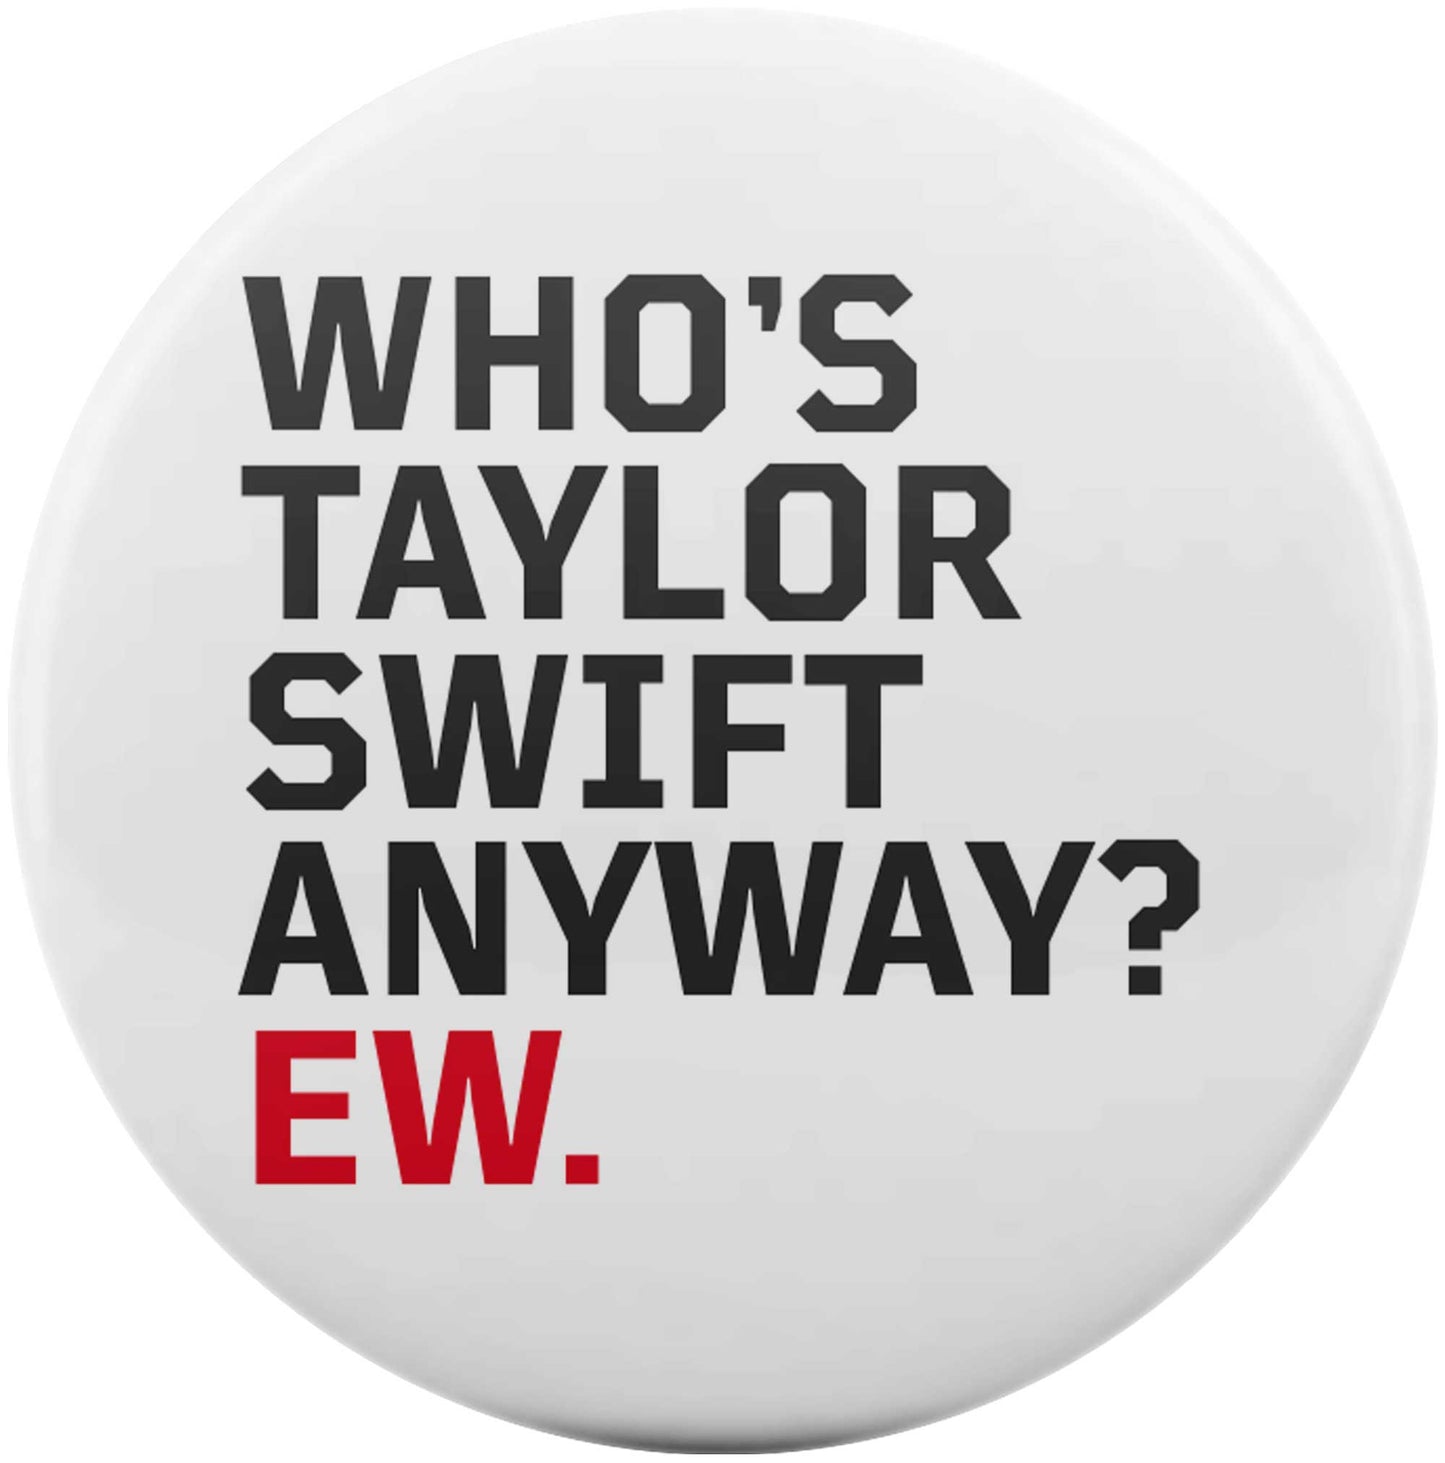 Who's Taylor Swift Anyway? Ew.